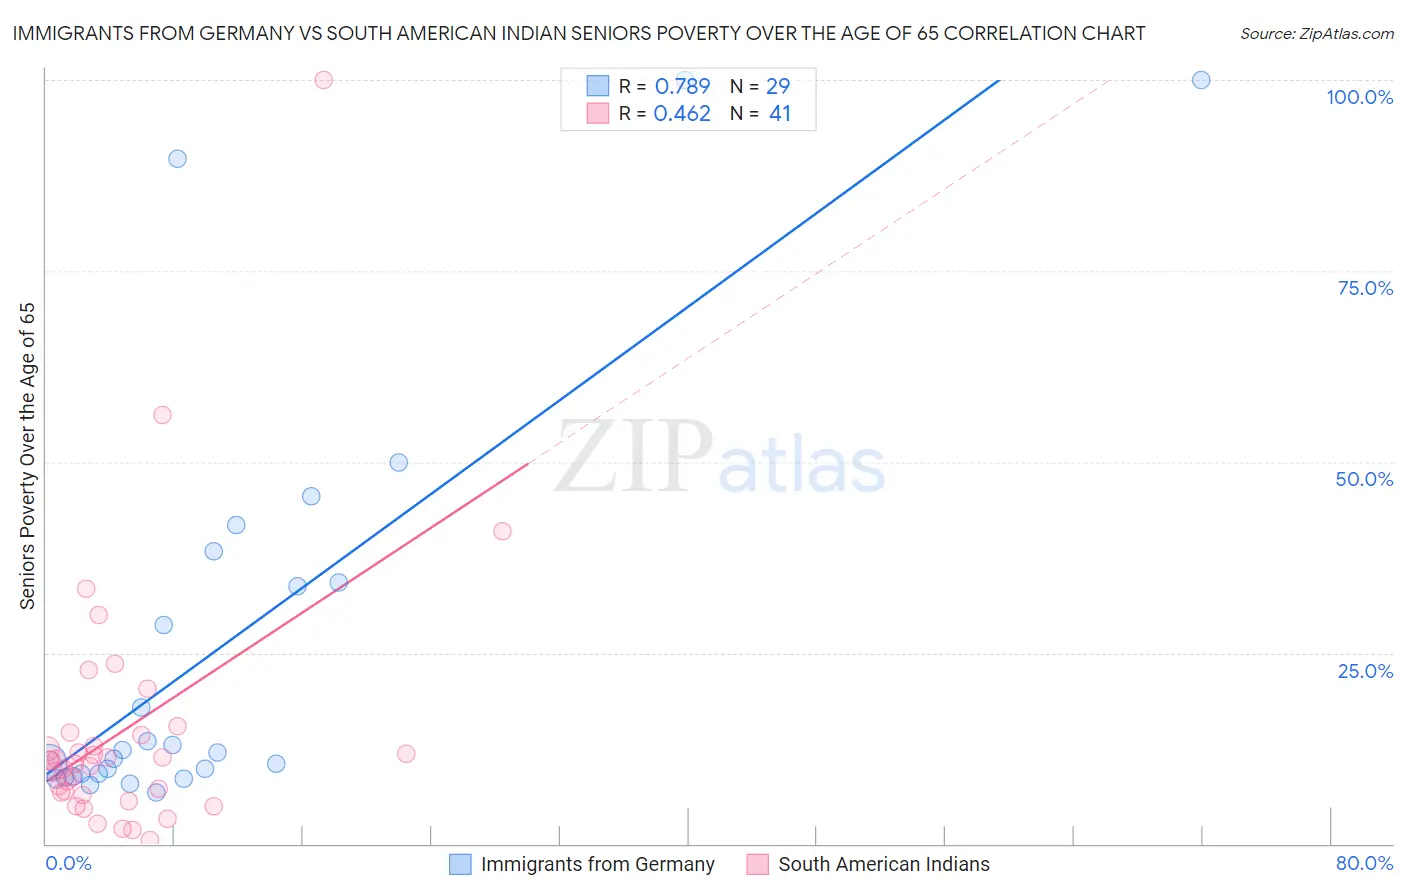 Immigrants from Germany vs South American Indian Seniors Poverty Over the Age of 65